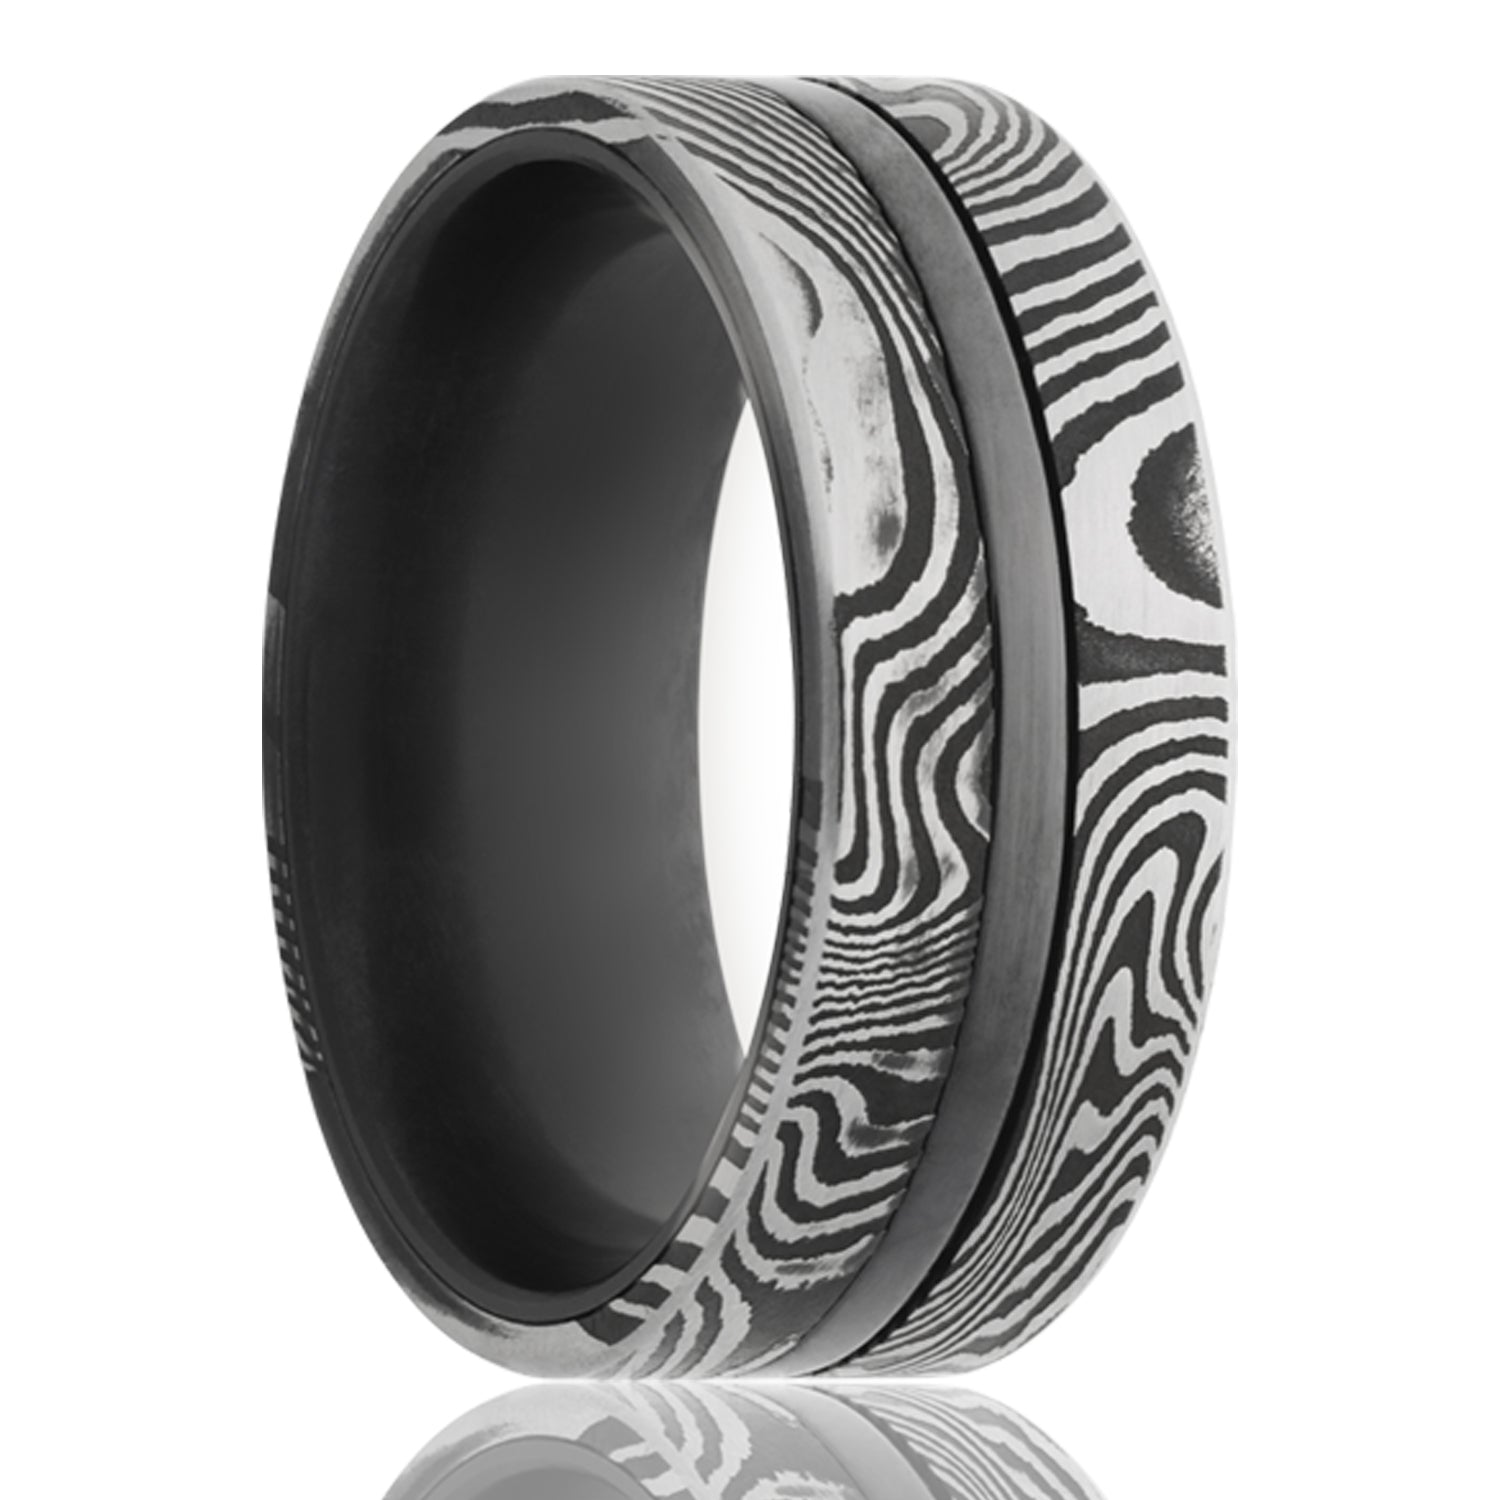 A groove damascus steel & zirconium men's wedding band displayed on a neutral white background.